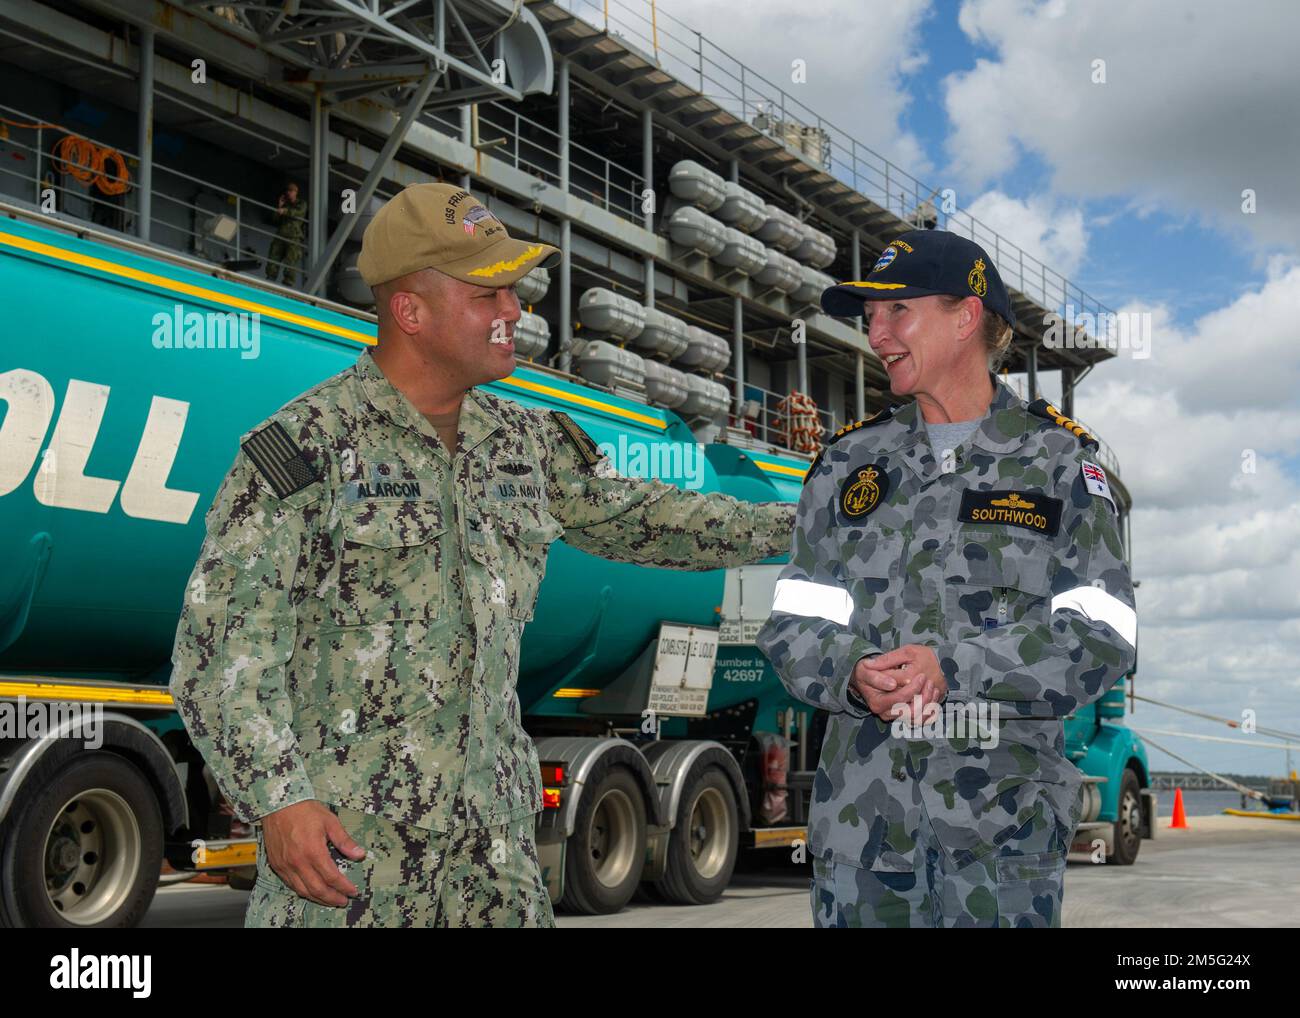 BRISBANE, Australia (March 16, 2022) U.S. Navy Capt. Al Alarcon, commanding officer of the Emory S. Land-class submarine tender USS Frank Cable (AS 40), speaks with Royal Australian Navy Cmdr. Fiona Southwood, the commanding officer of HMAS Moreton, prior to a tour of Frank Cable, March 16. Frank Cable is currently on patrol conducting expeditionary maintenance and logistics in support of national security in the U.S. 7th Fleet area of operations Stock Photo